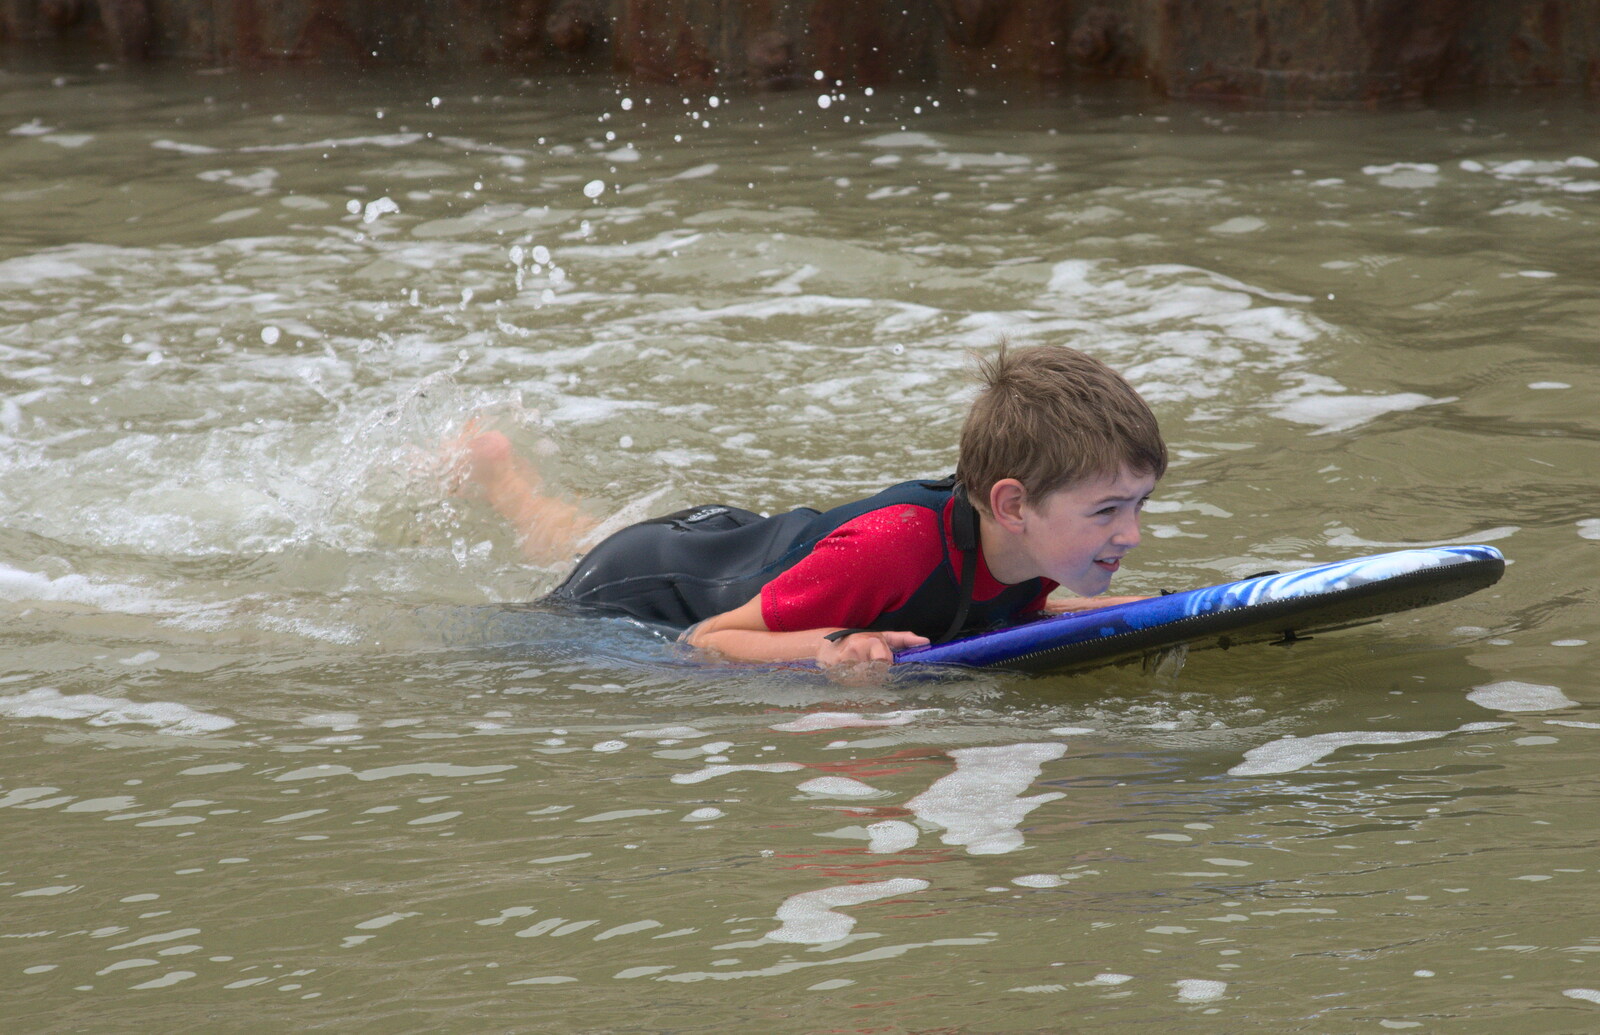 Fred practices a bit of body boarding from An Optimistic Camping Weekend, Waxham Sands, Norfolk - 22nd September 2018